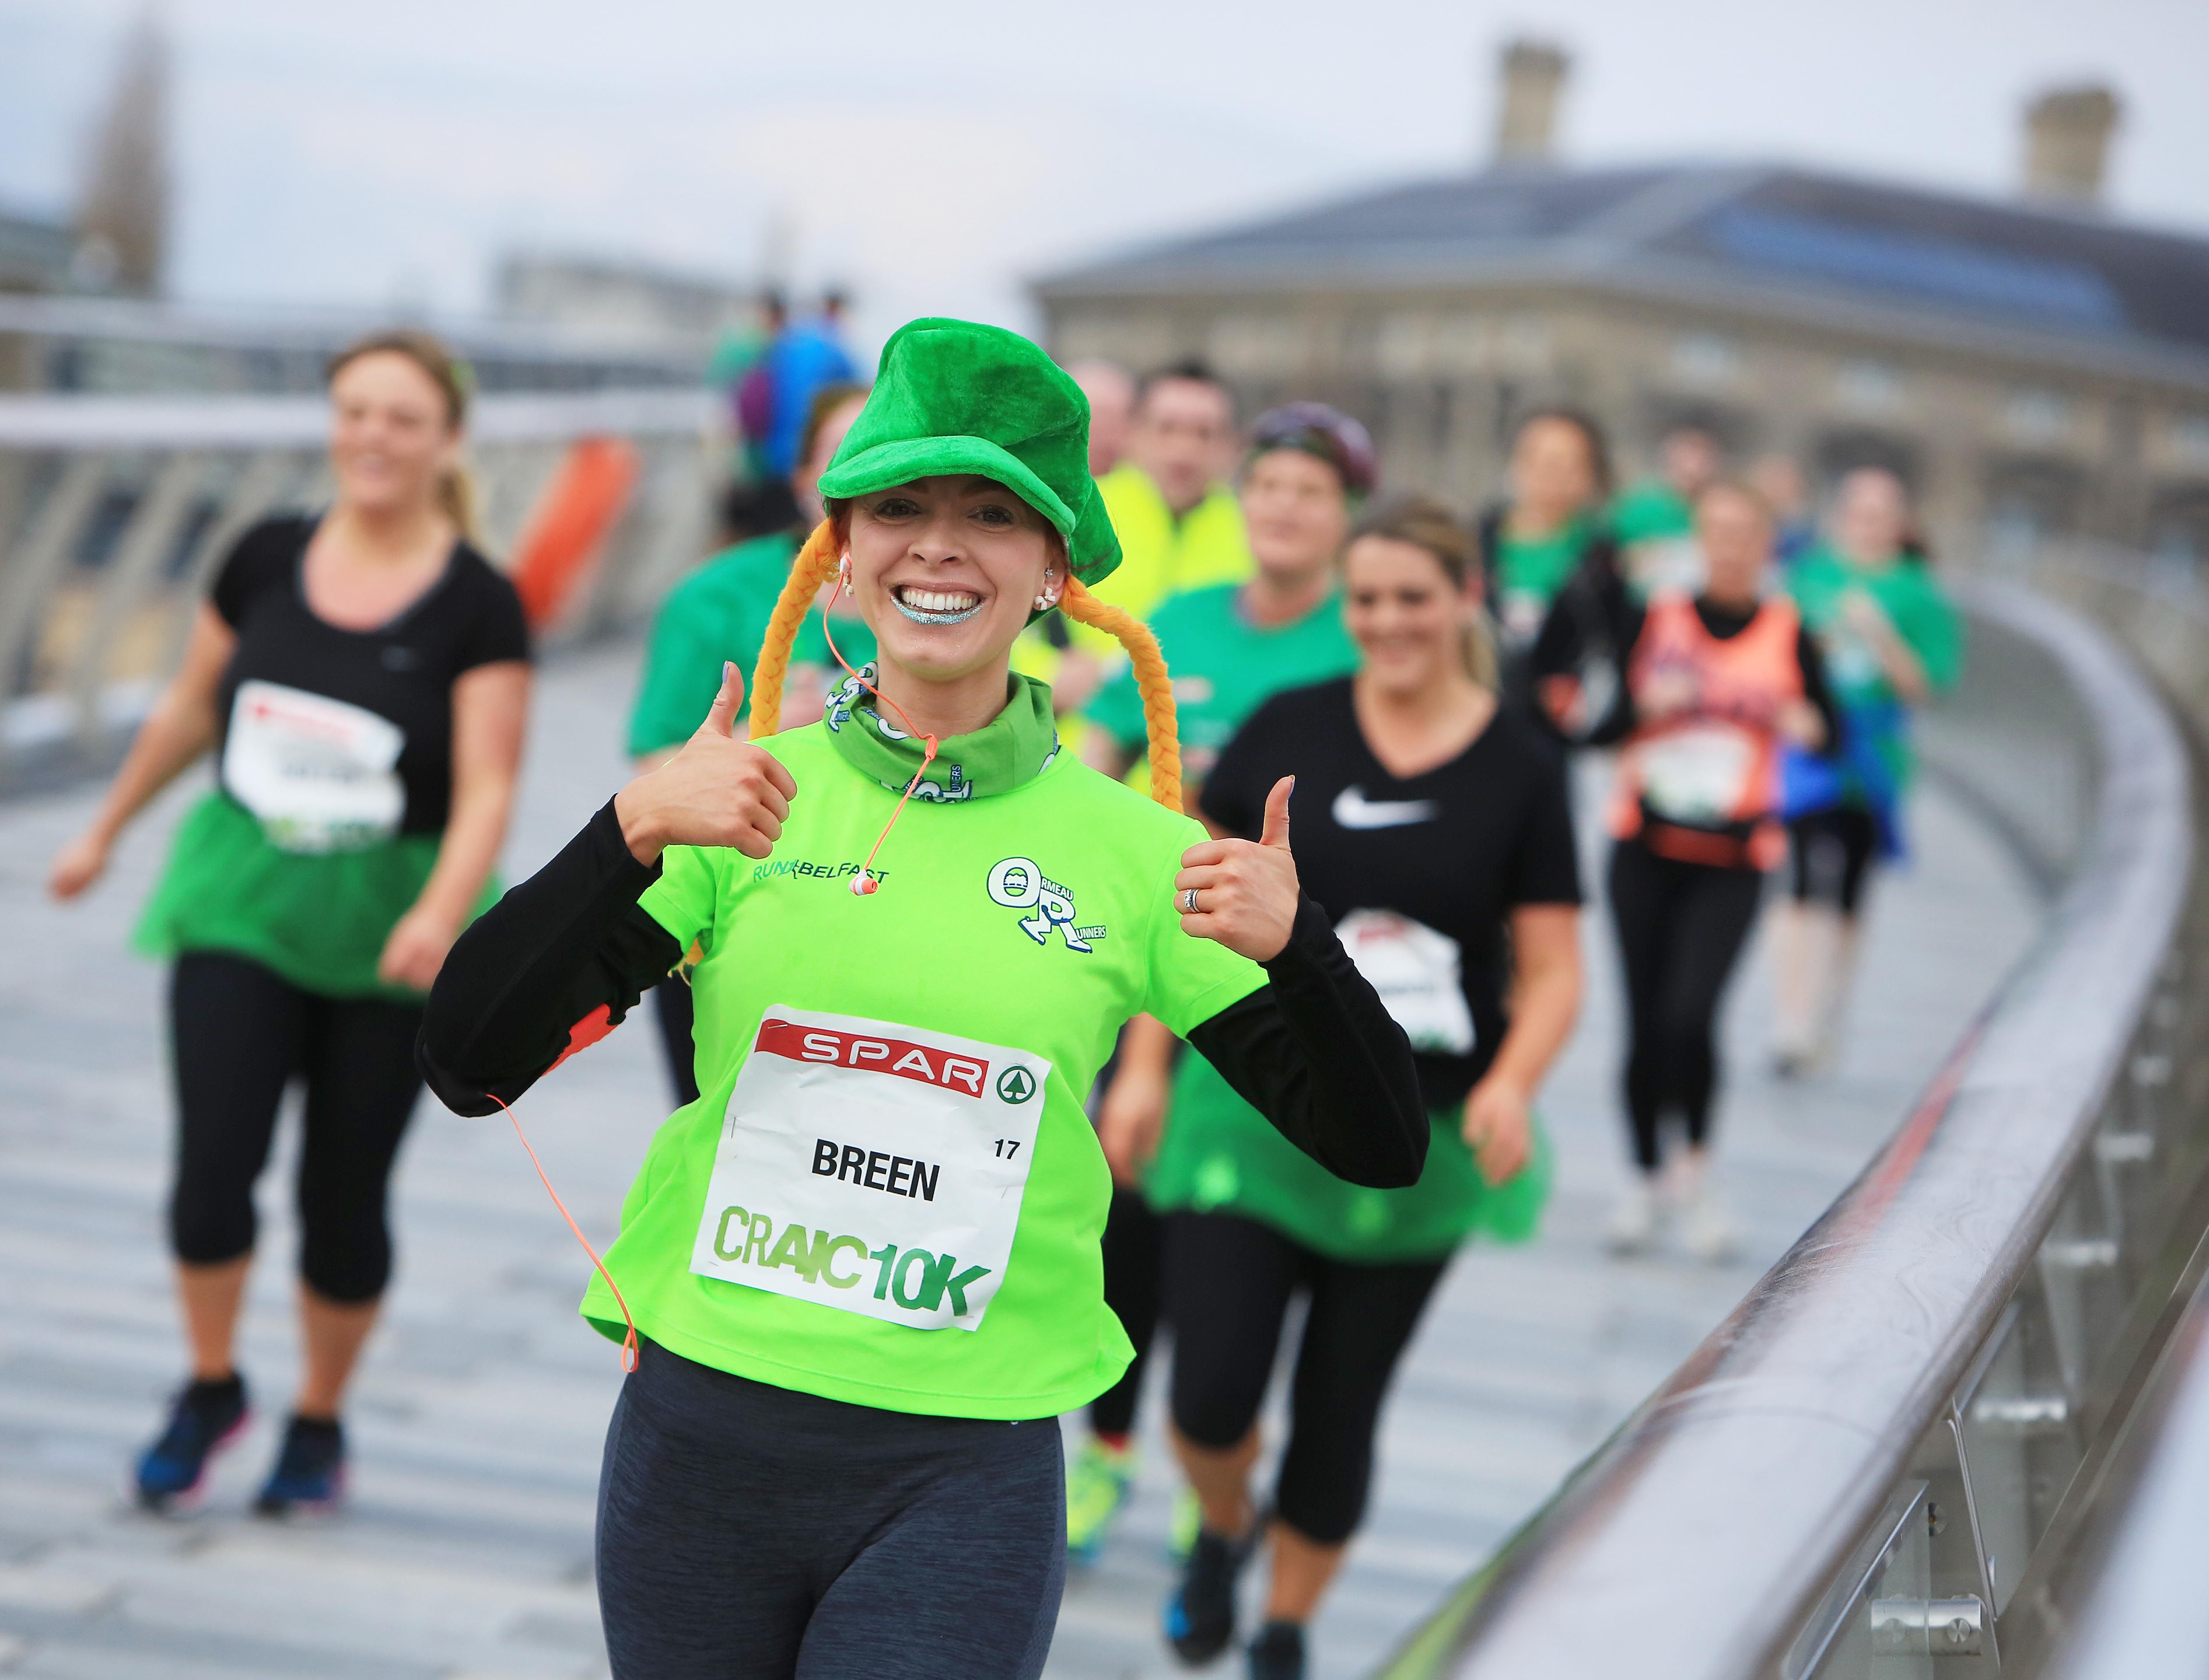 JOIN THE GLOBAL EVENT: You too could look the part on St Patrick’s Day next month